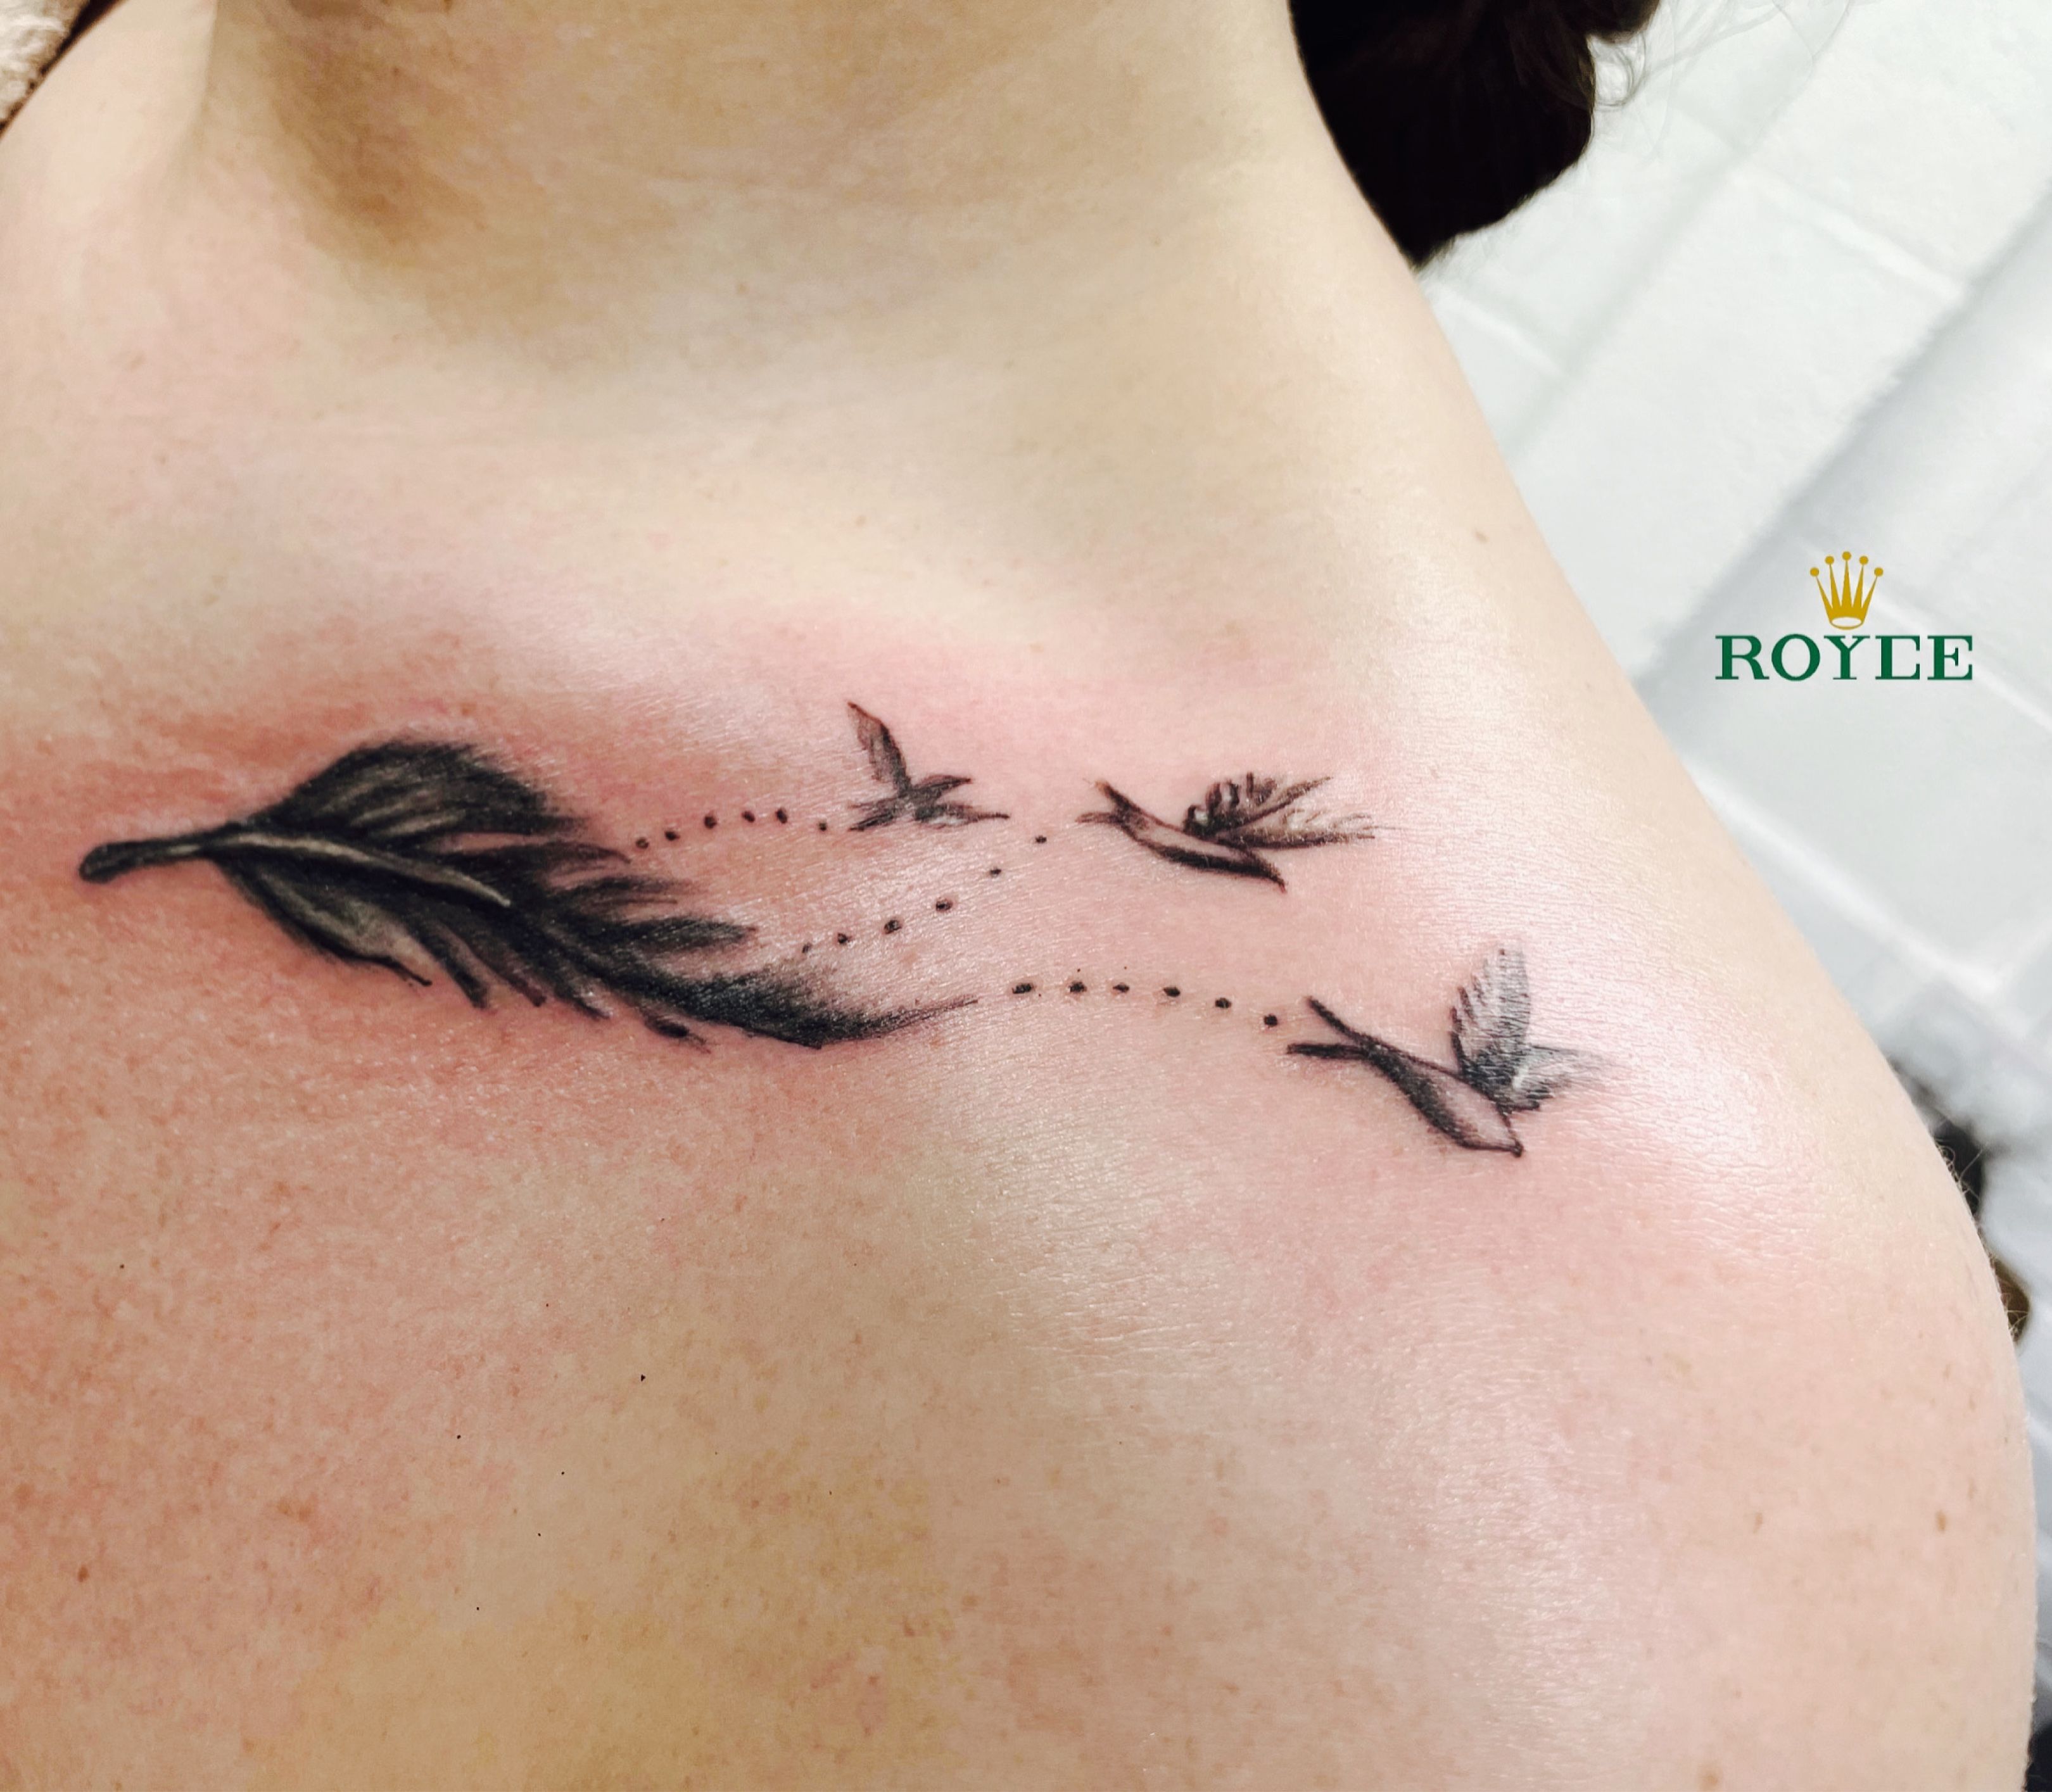 Sparrow Tattoo: What Does It Mean?